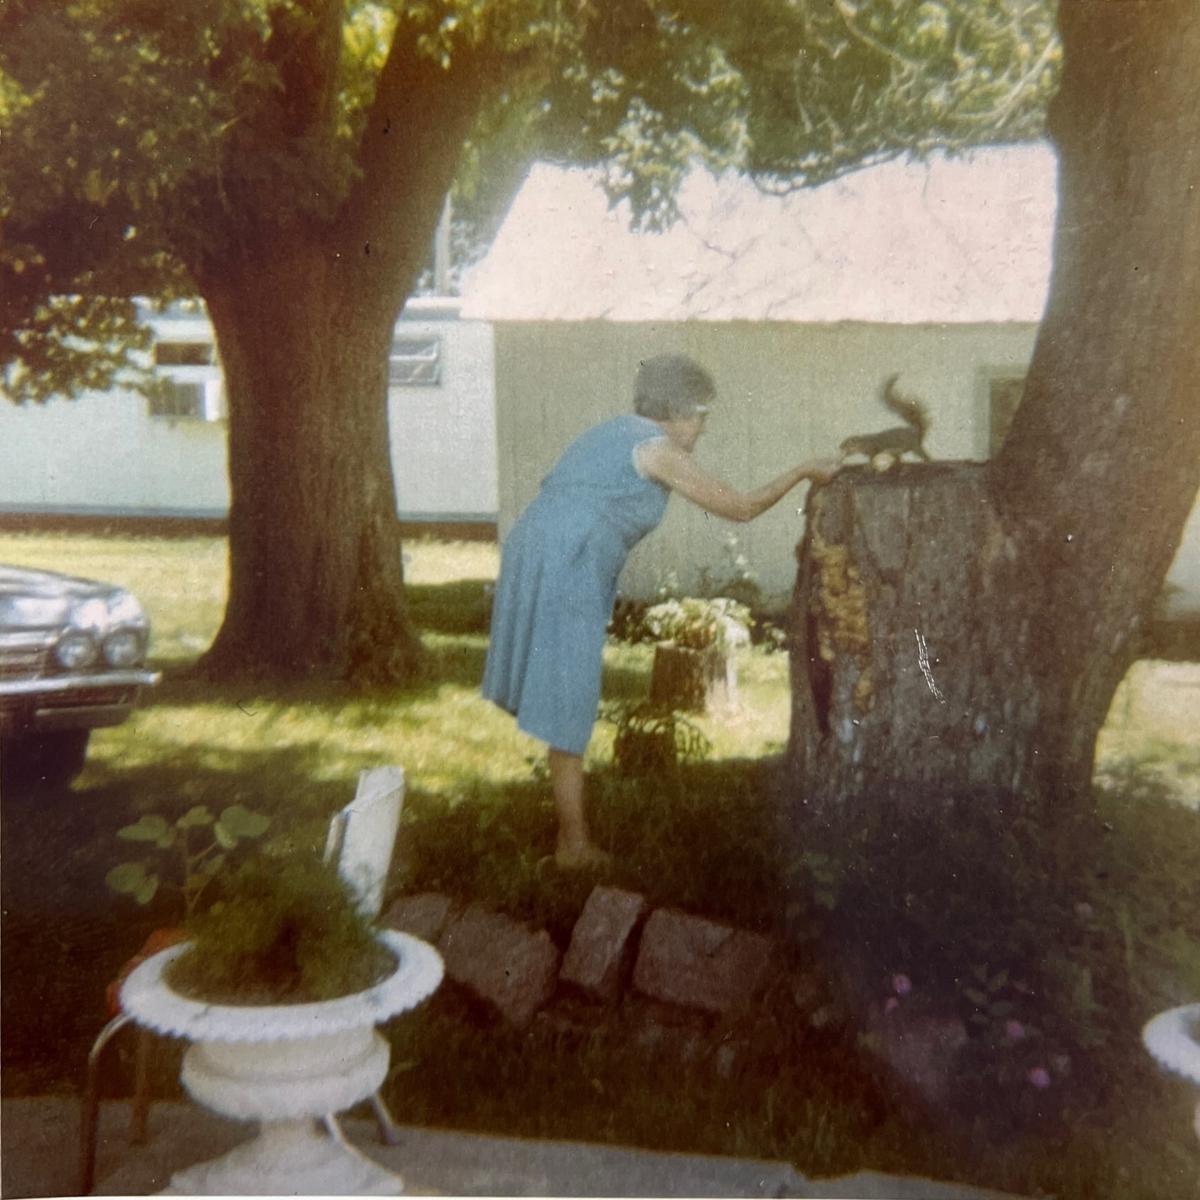 Grandma Edith's banana cookies were universally beloved—including by her backyard squirrels, pictured here eating one out of her hand. (Courtesy of Teresa Todt)